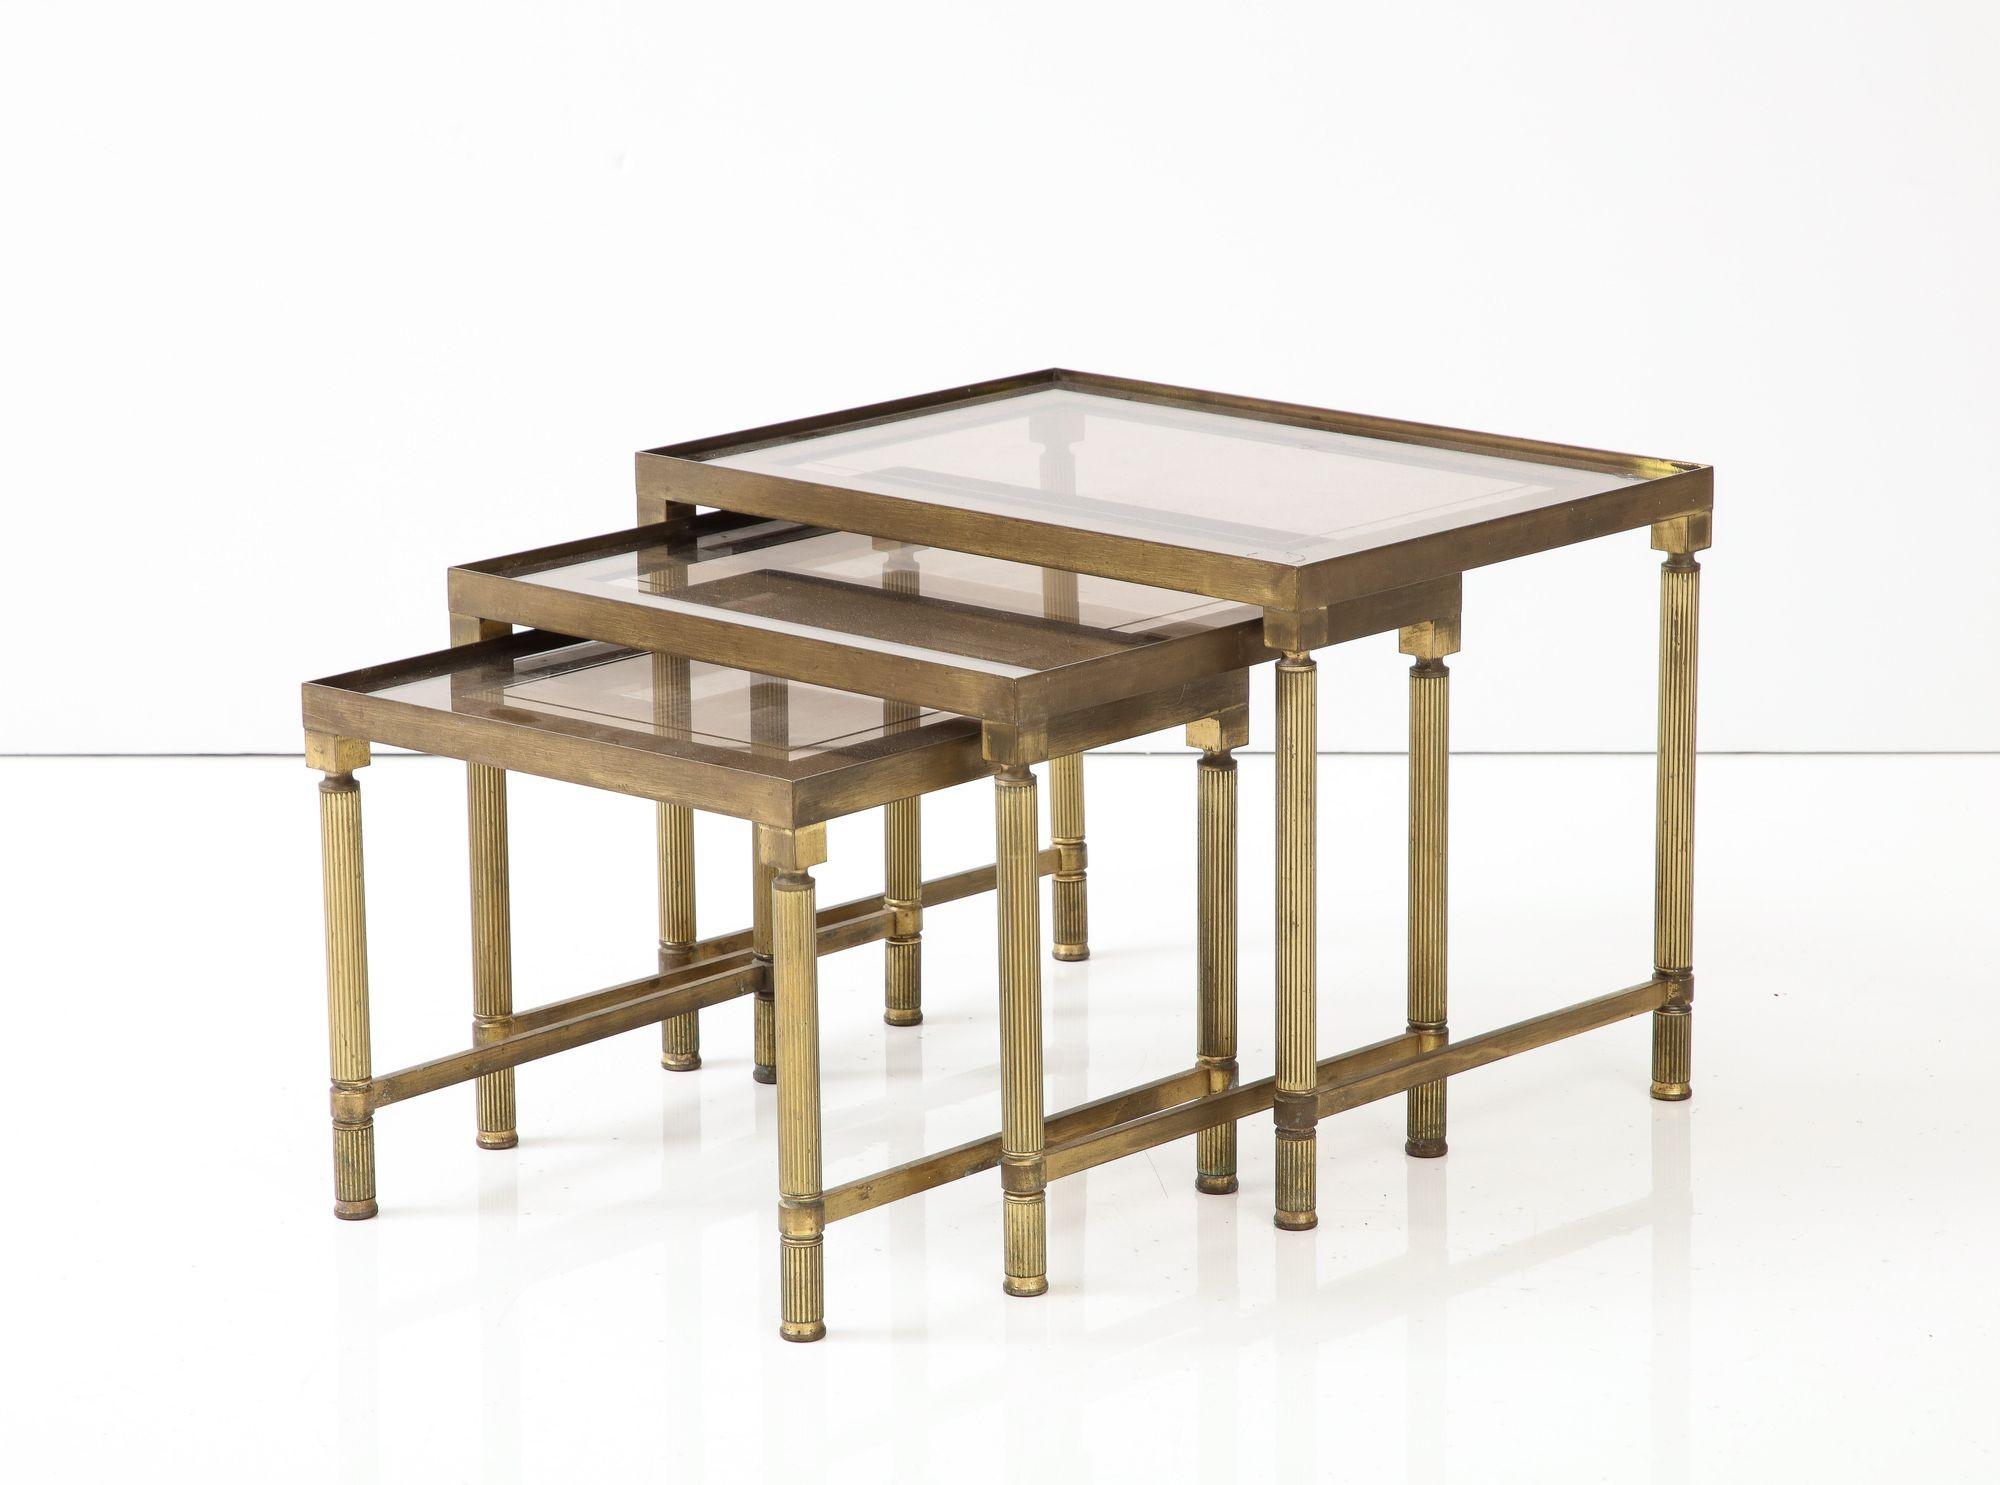 This trio of mid-20th-century French Maison Bagues nesting tables epitomizes timeless sophistication and exquisite craftsmanship. Supported by timeworn brass legs and stretchers, these tables exude opulence. Their smoked glass tops, adorned with a